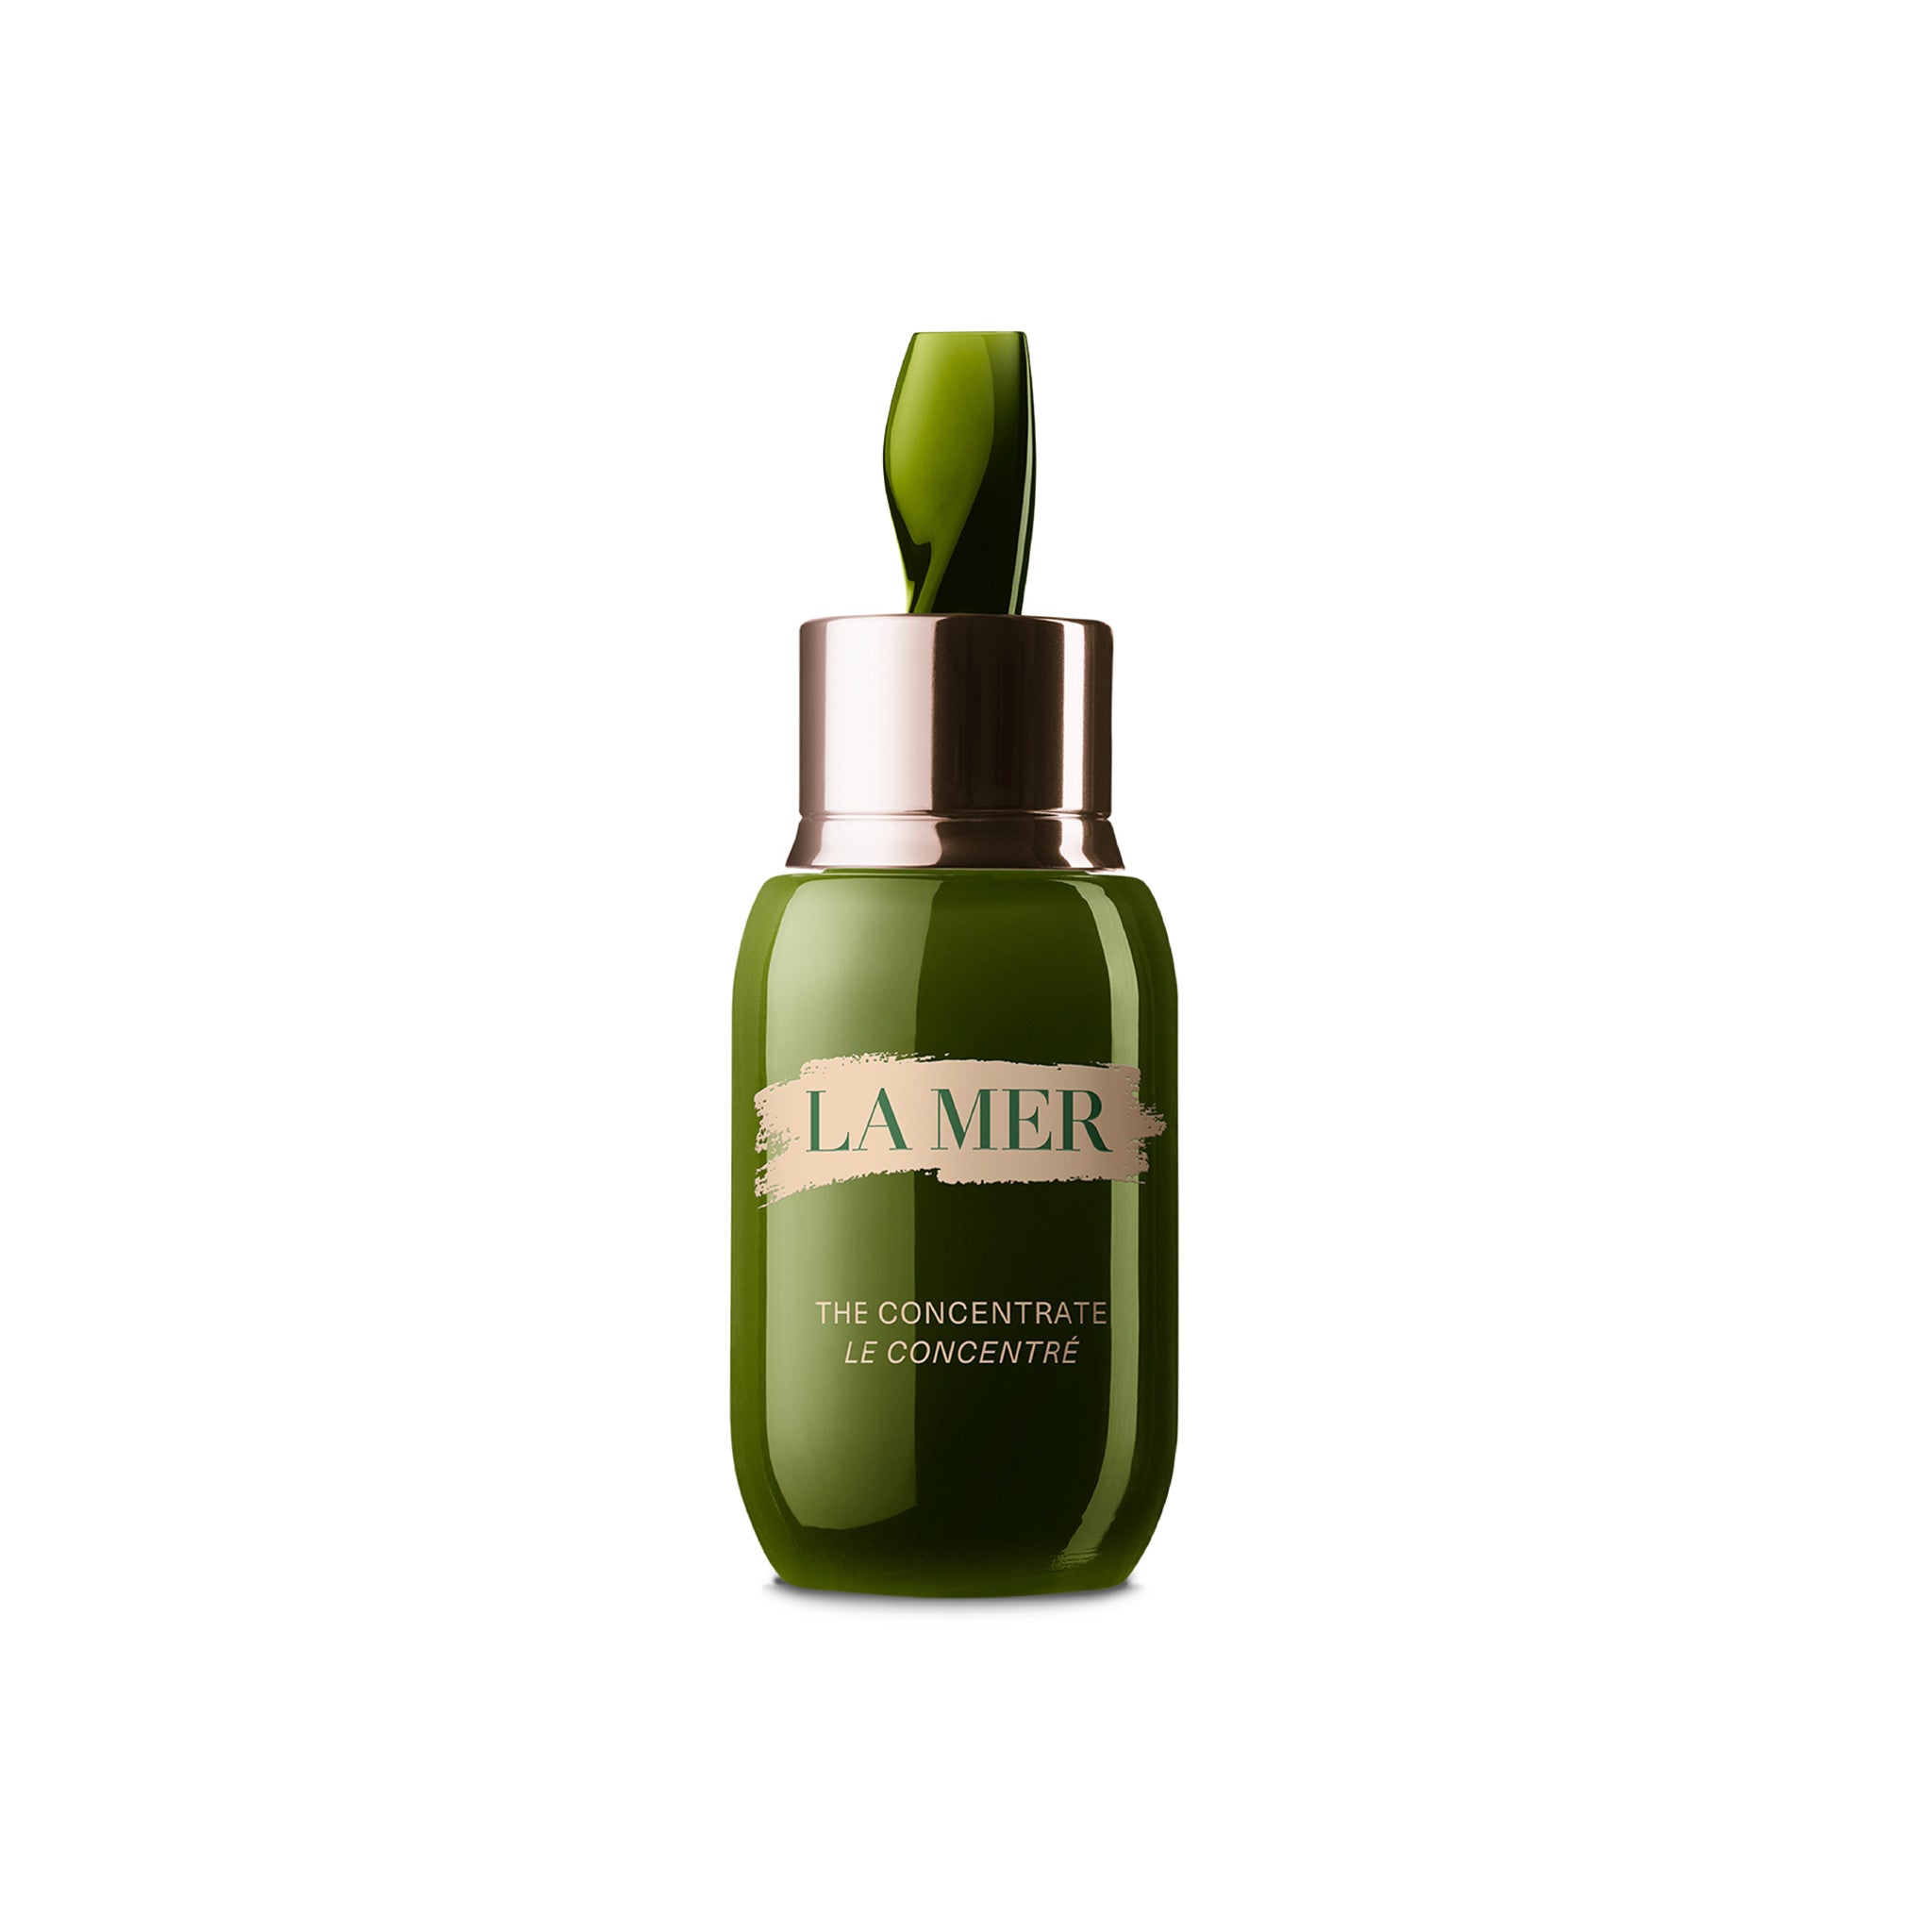 La Mer The Concentrate Size variant: 1.7 oz. main image.